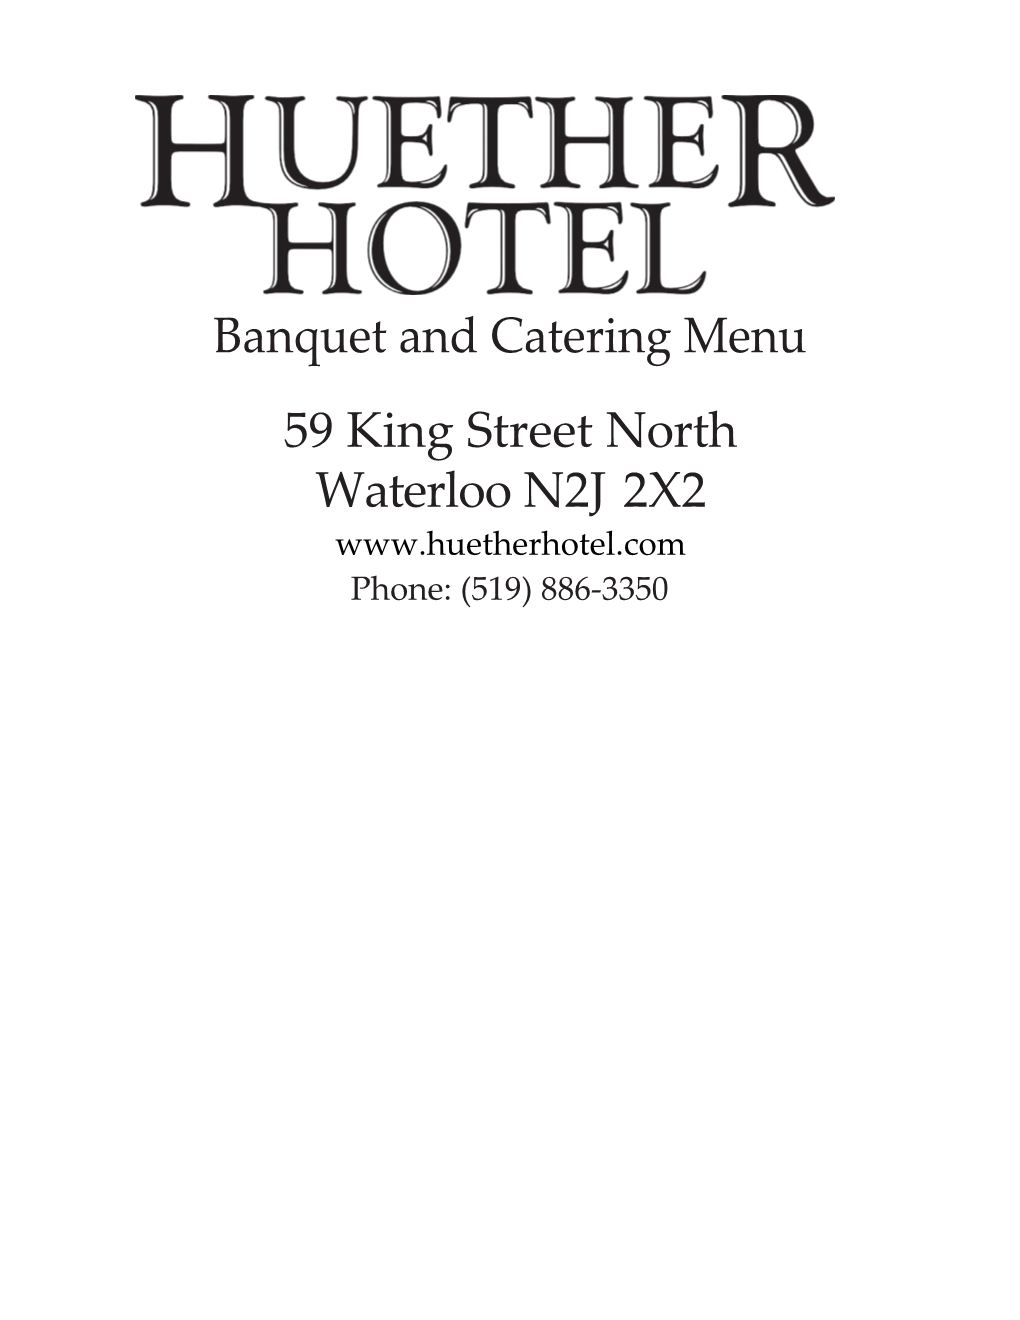 Banquet and Catering Menu